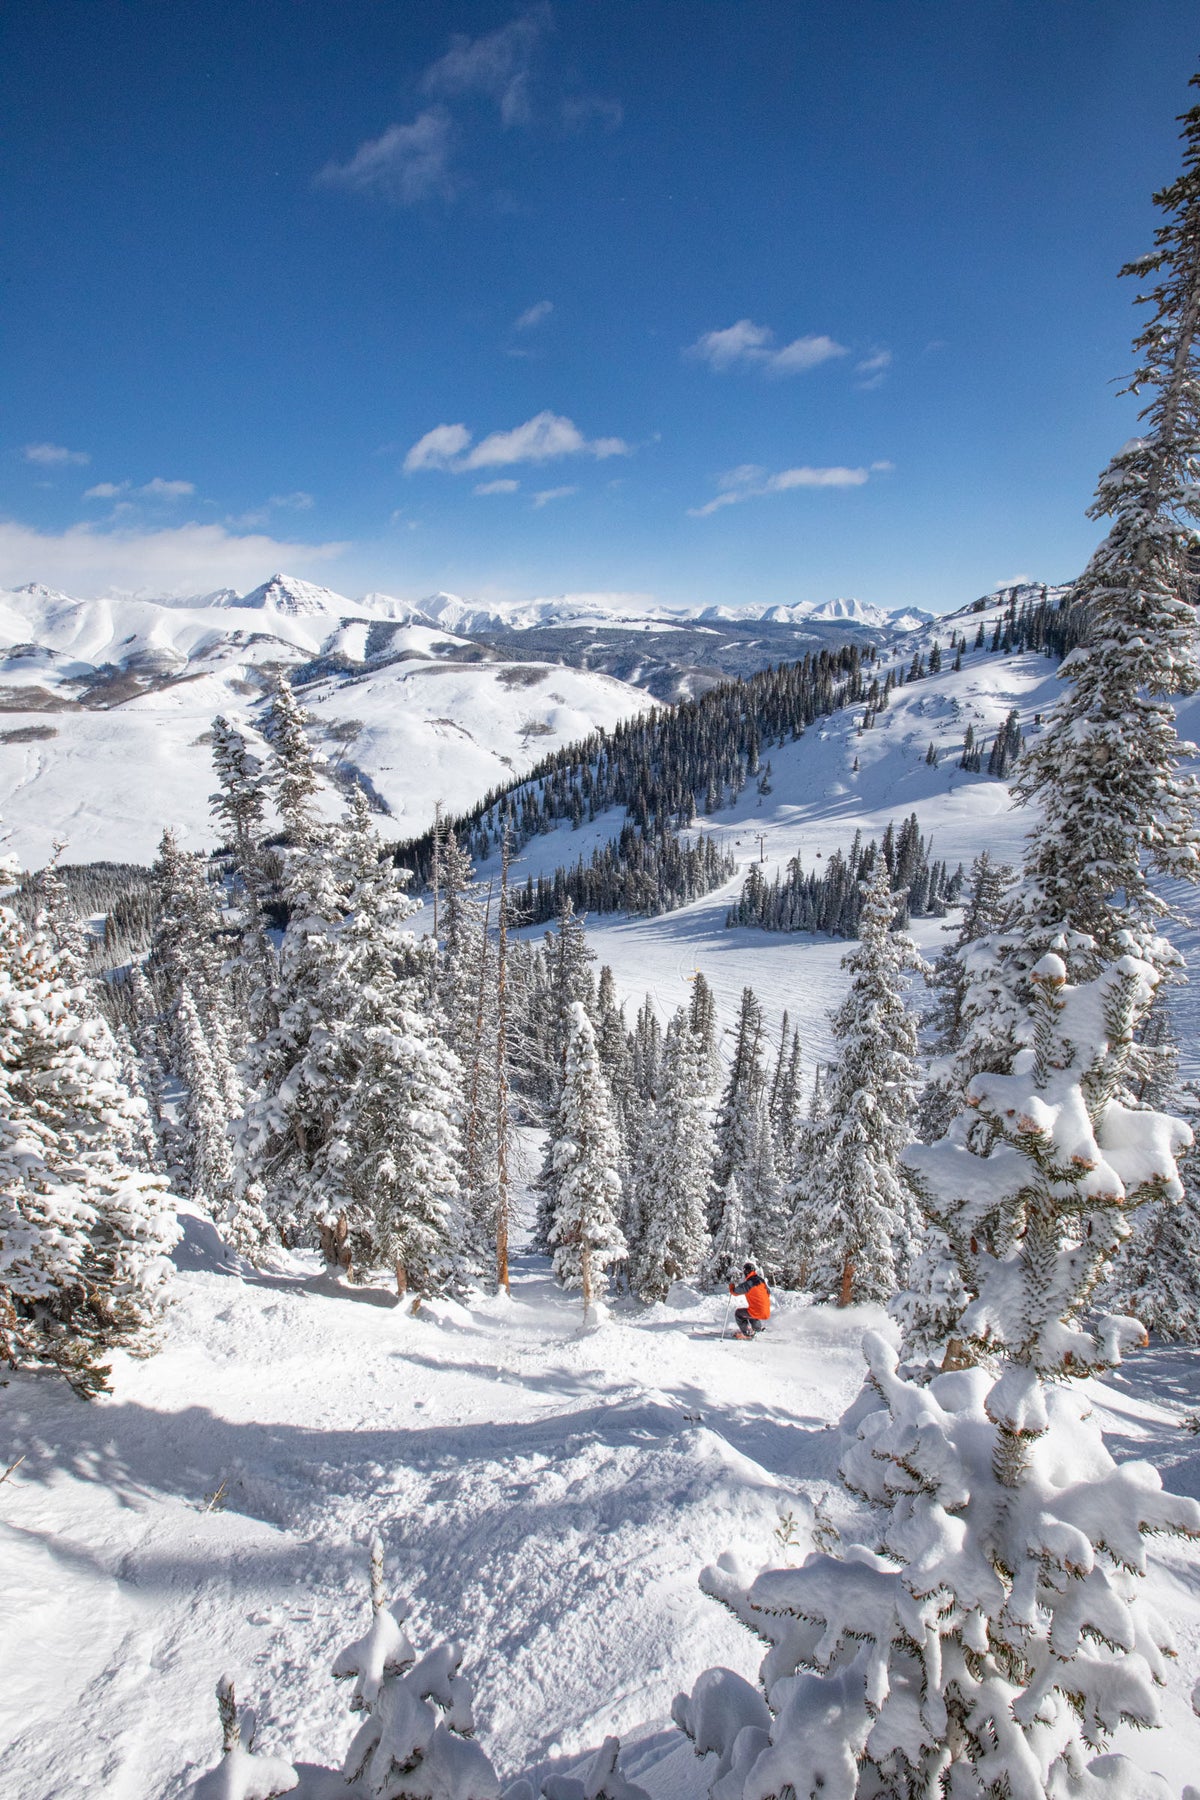 8 Reasons Women's Big-Mountain Ski Camps Are Rad (and 5 to Try)